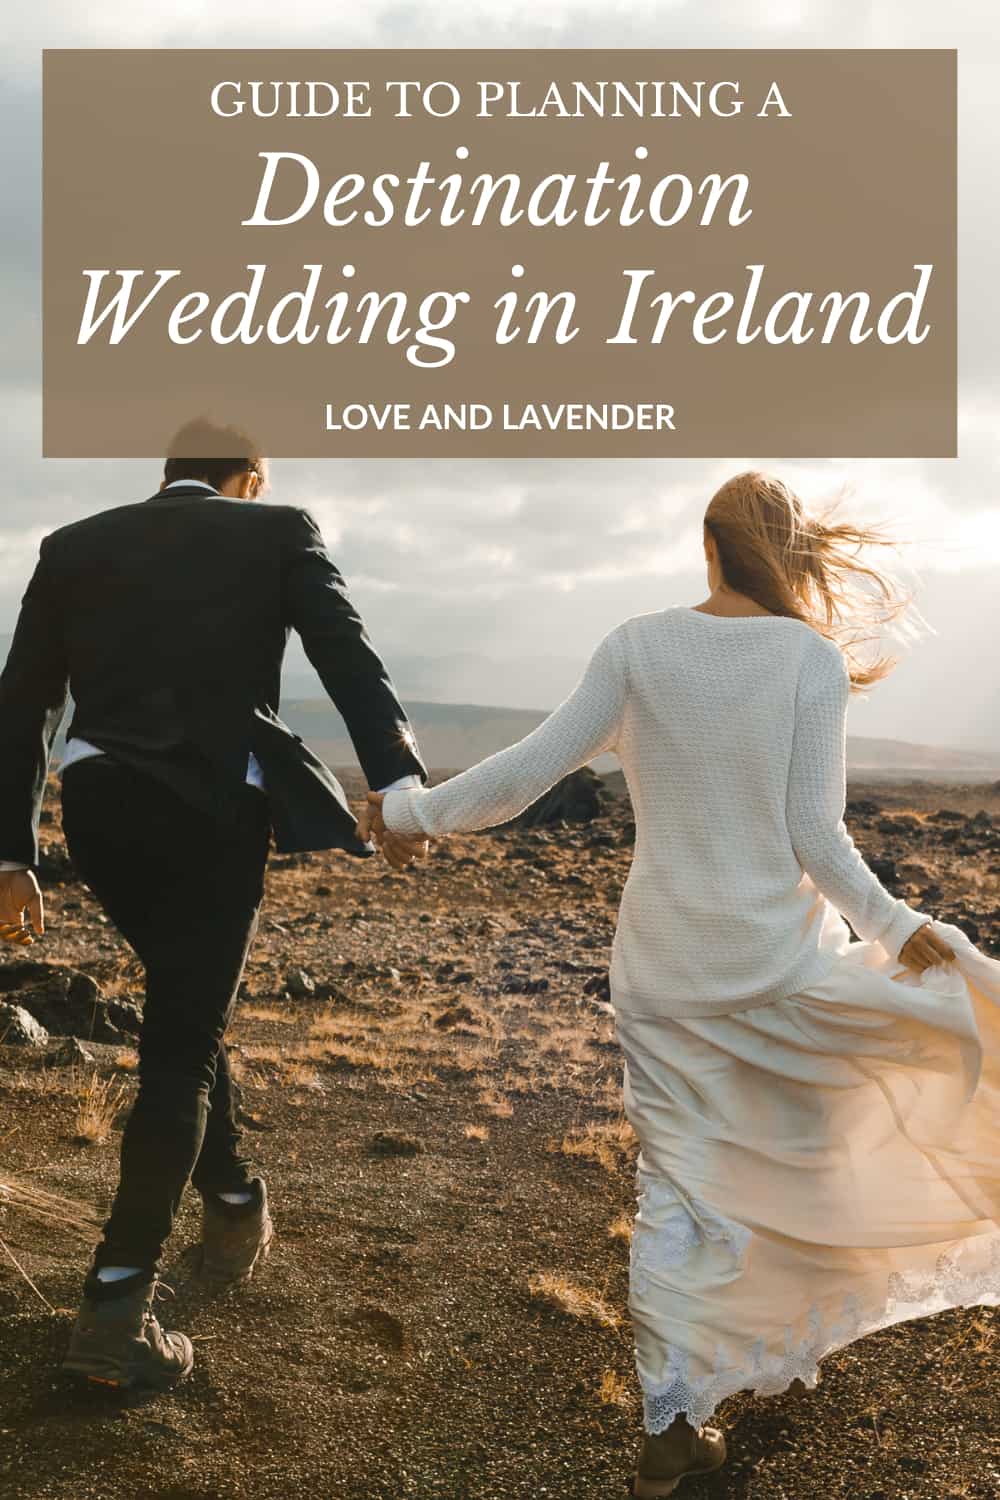 Pinterest pin - Guide to Planning a Destination Wedding in Ireland